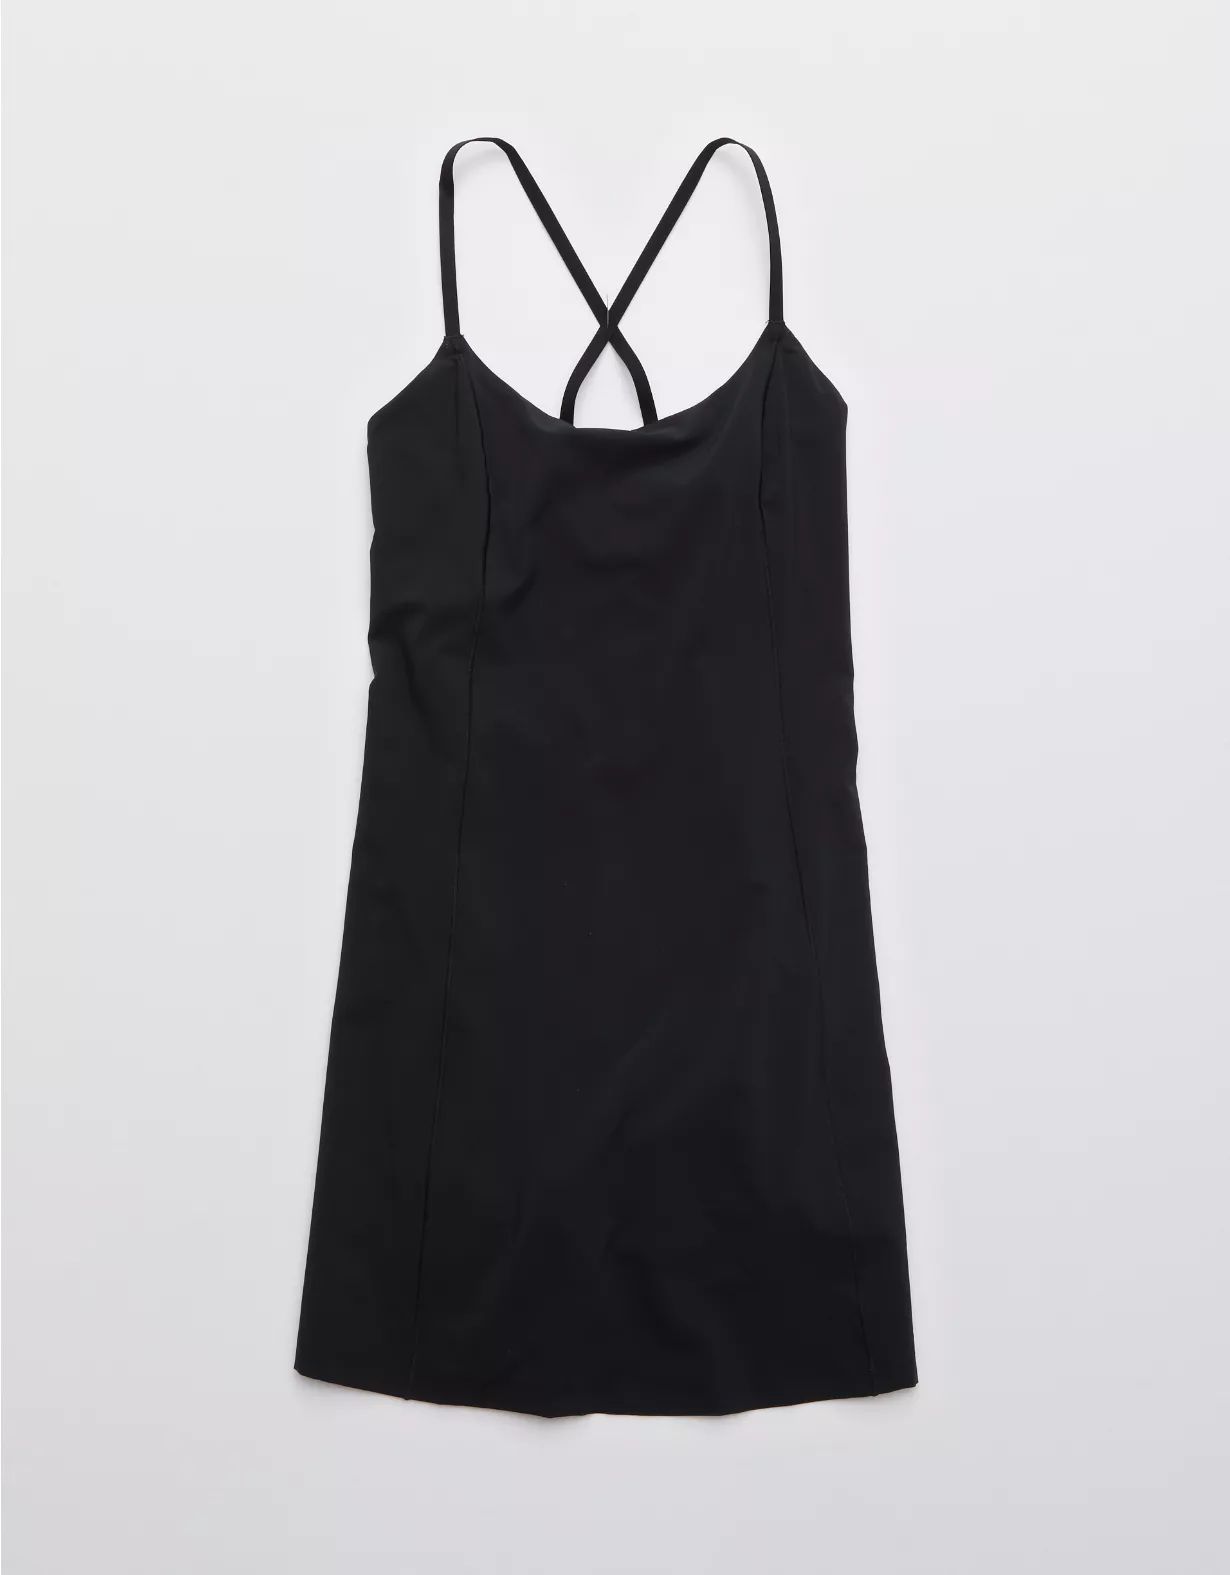 OFFLINE By Aerie Exercise Dress | Aerie